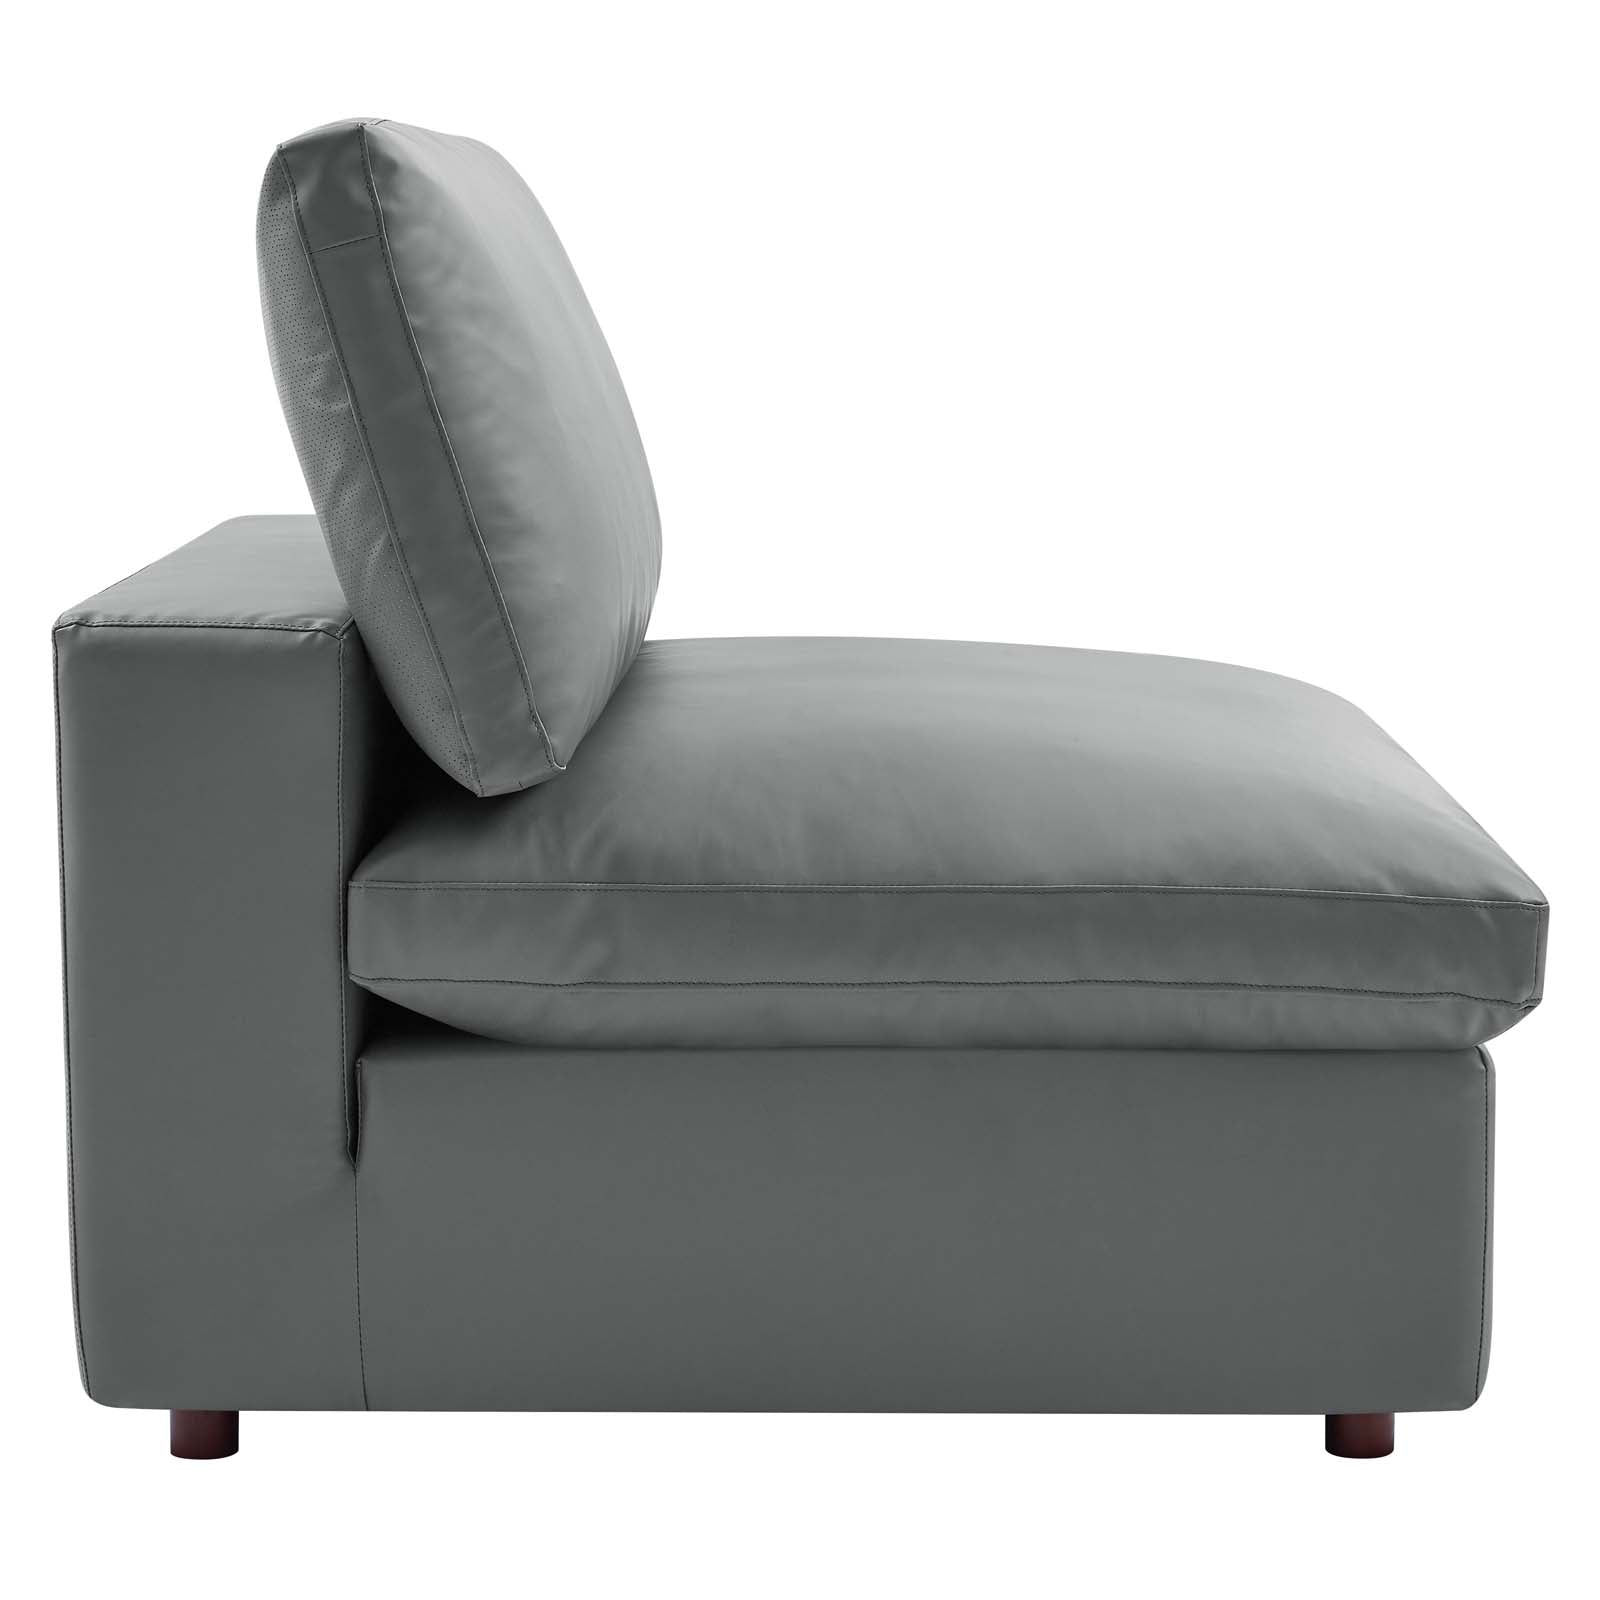 Modway Sofas & Couches - Commix Down Filled Overstuffed Vegan Leather 4 Seater Sofa Gray